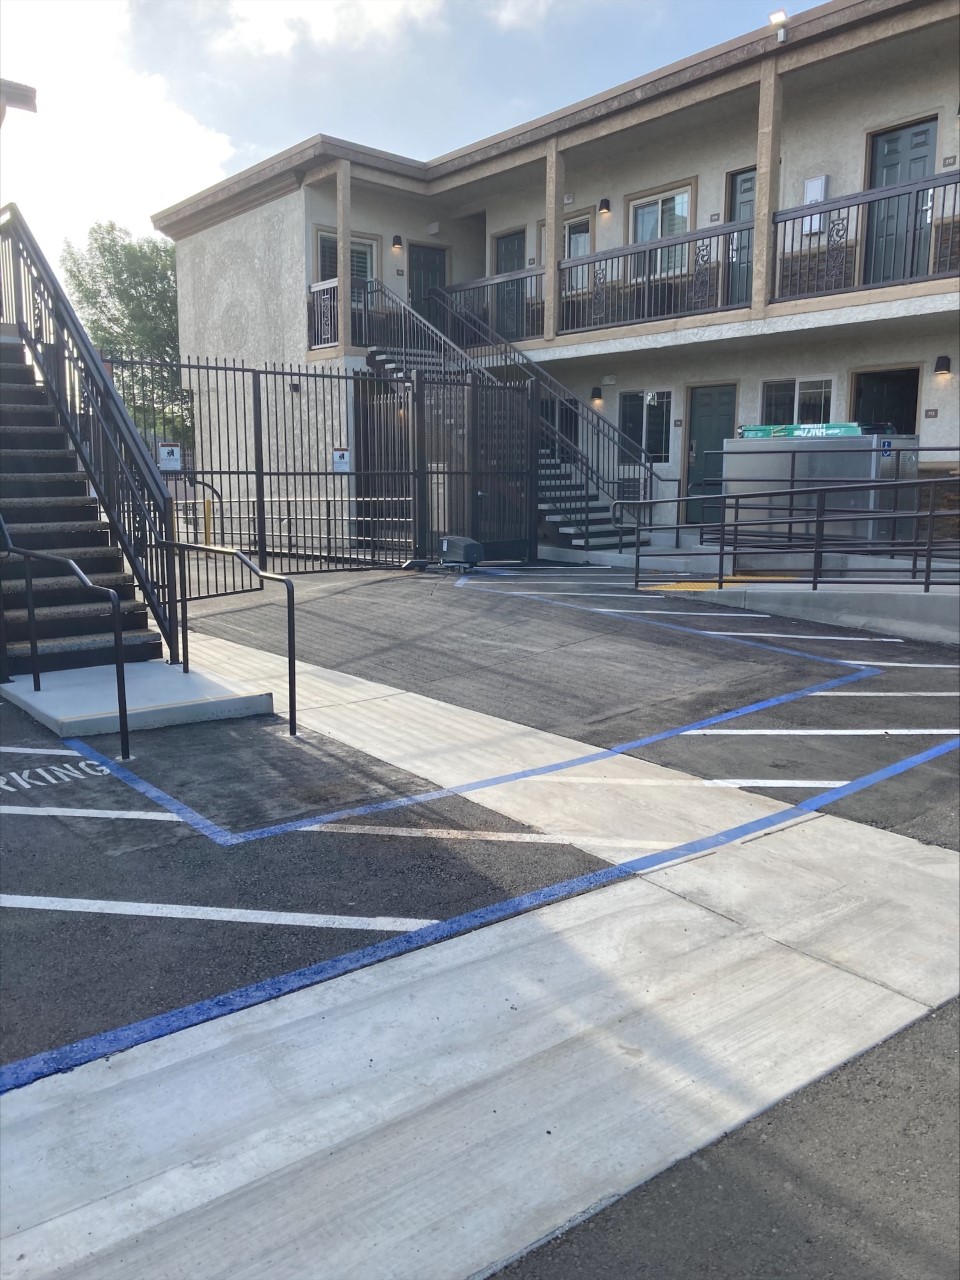 View of Western Avenue Apartments from inside the complex. There is a entry gate and gated door to get into the complex, and a wheelchair ramp to get to first floor of one of the buildings.